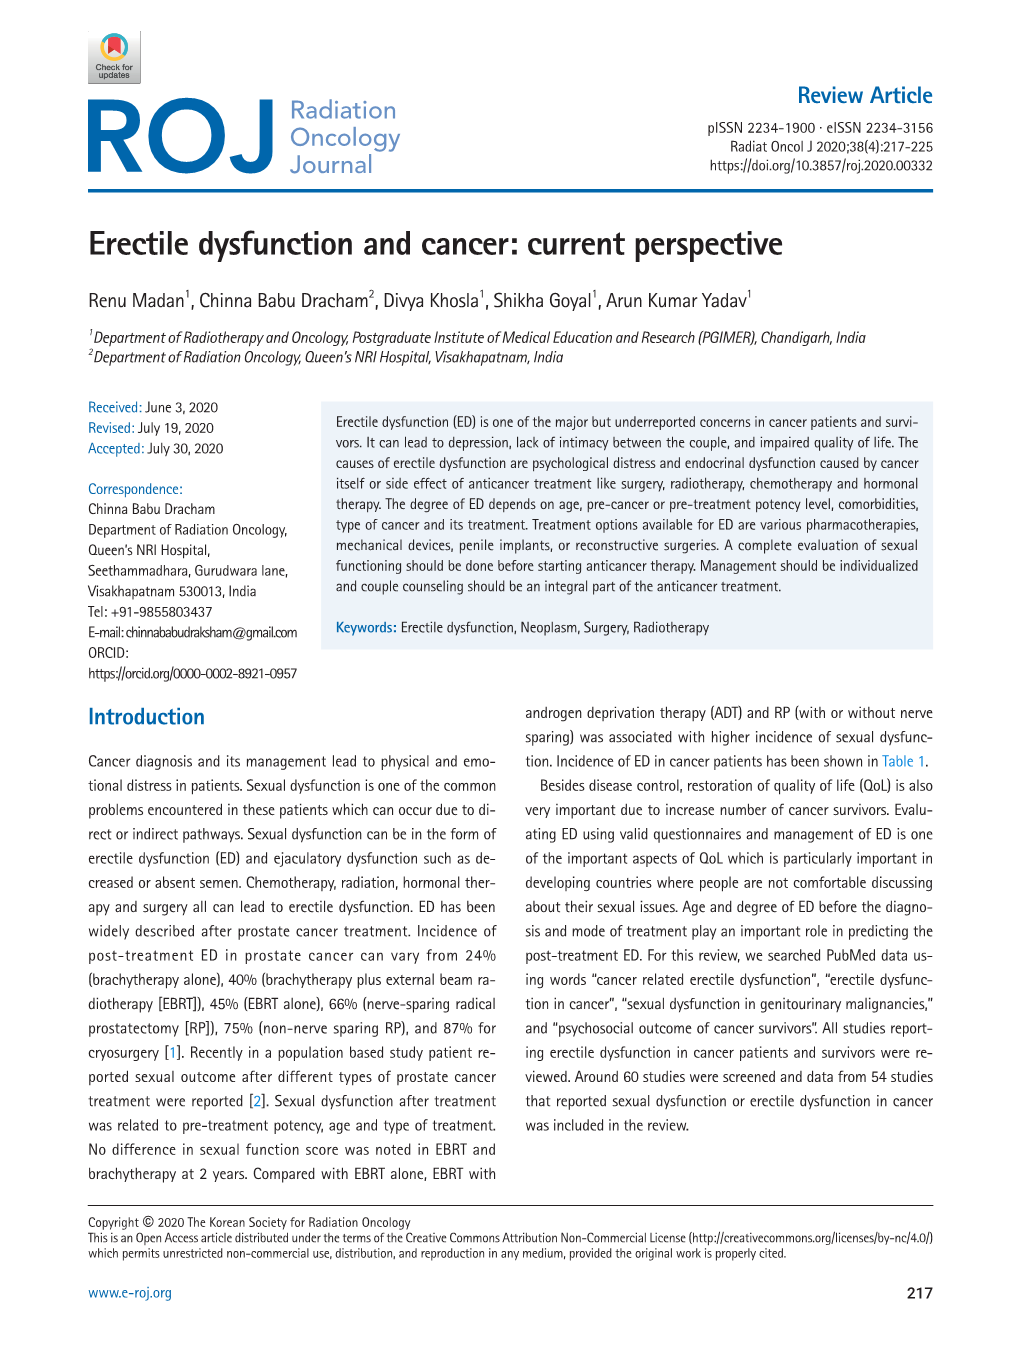 Erectile Dysfunction and Cancer: Current Perspective